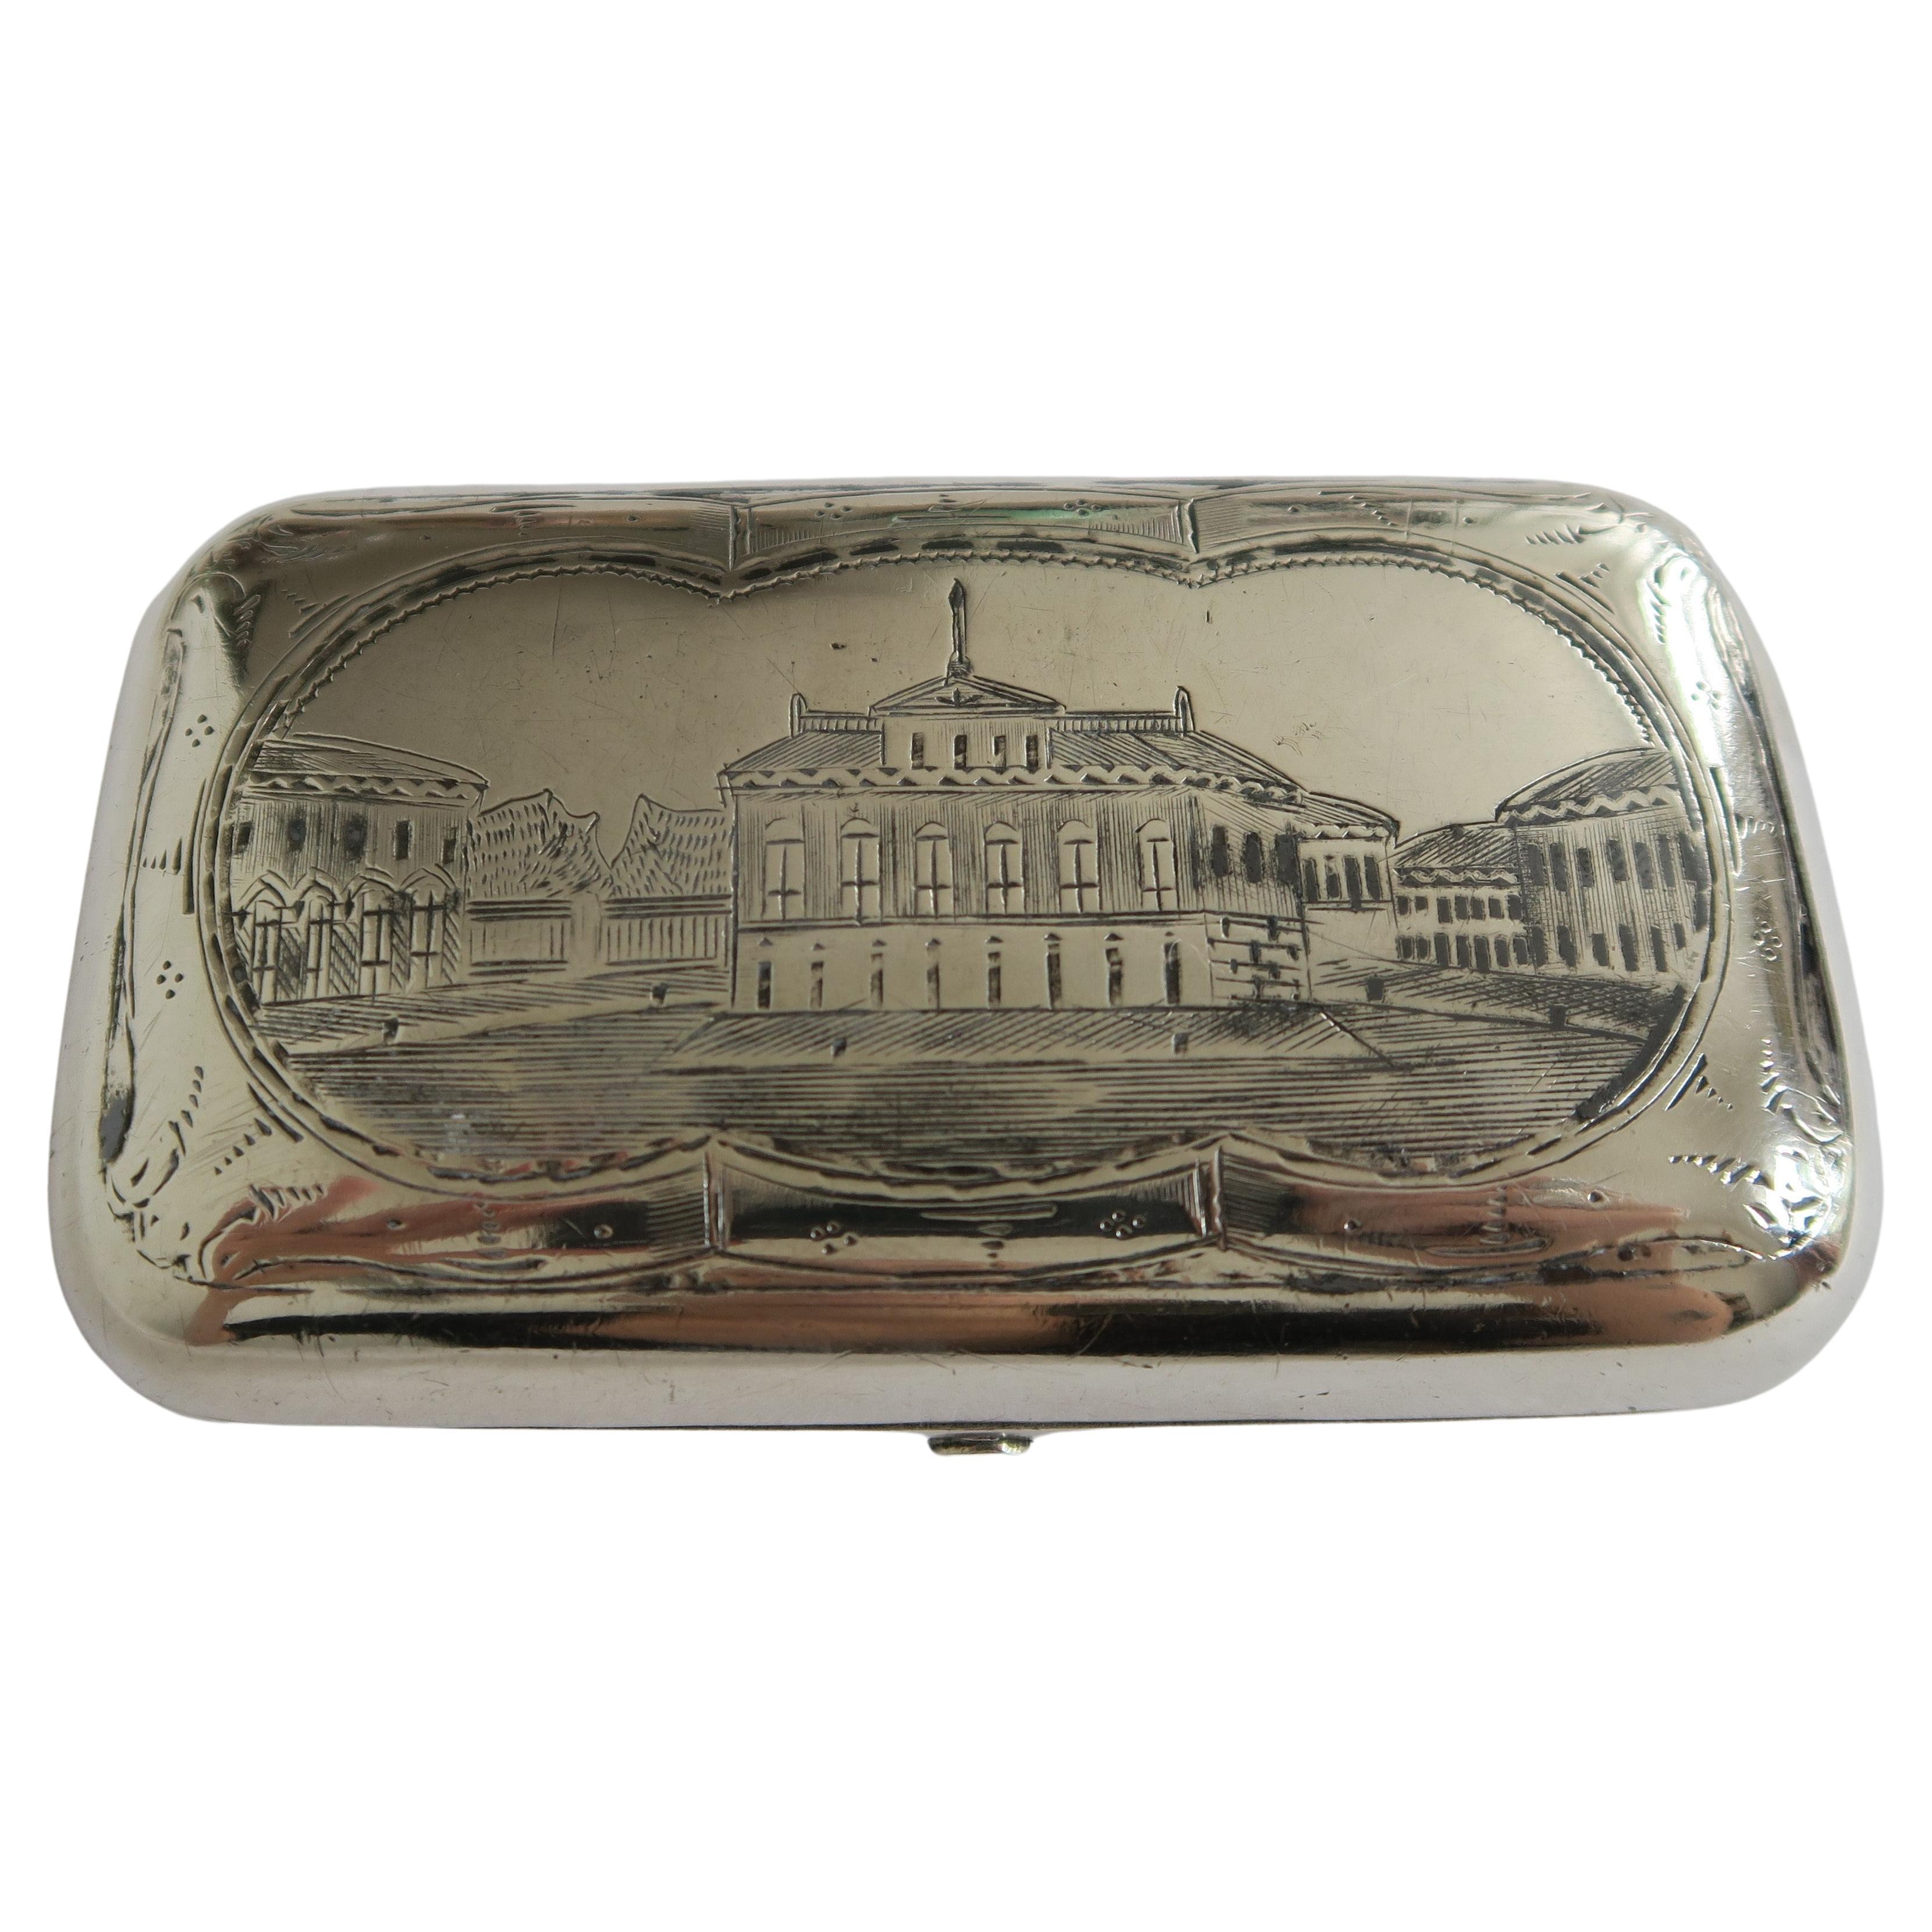 Antique Russian Silver Snuffbox with Architecture Motif